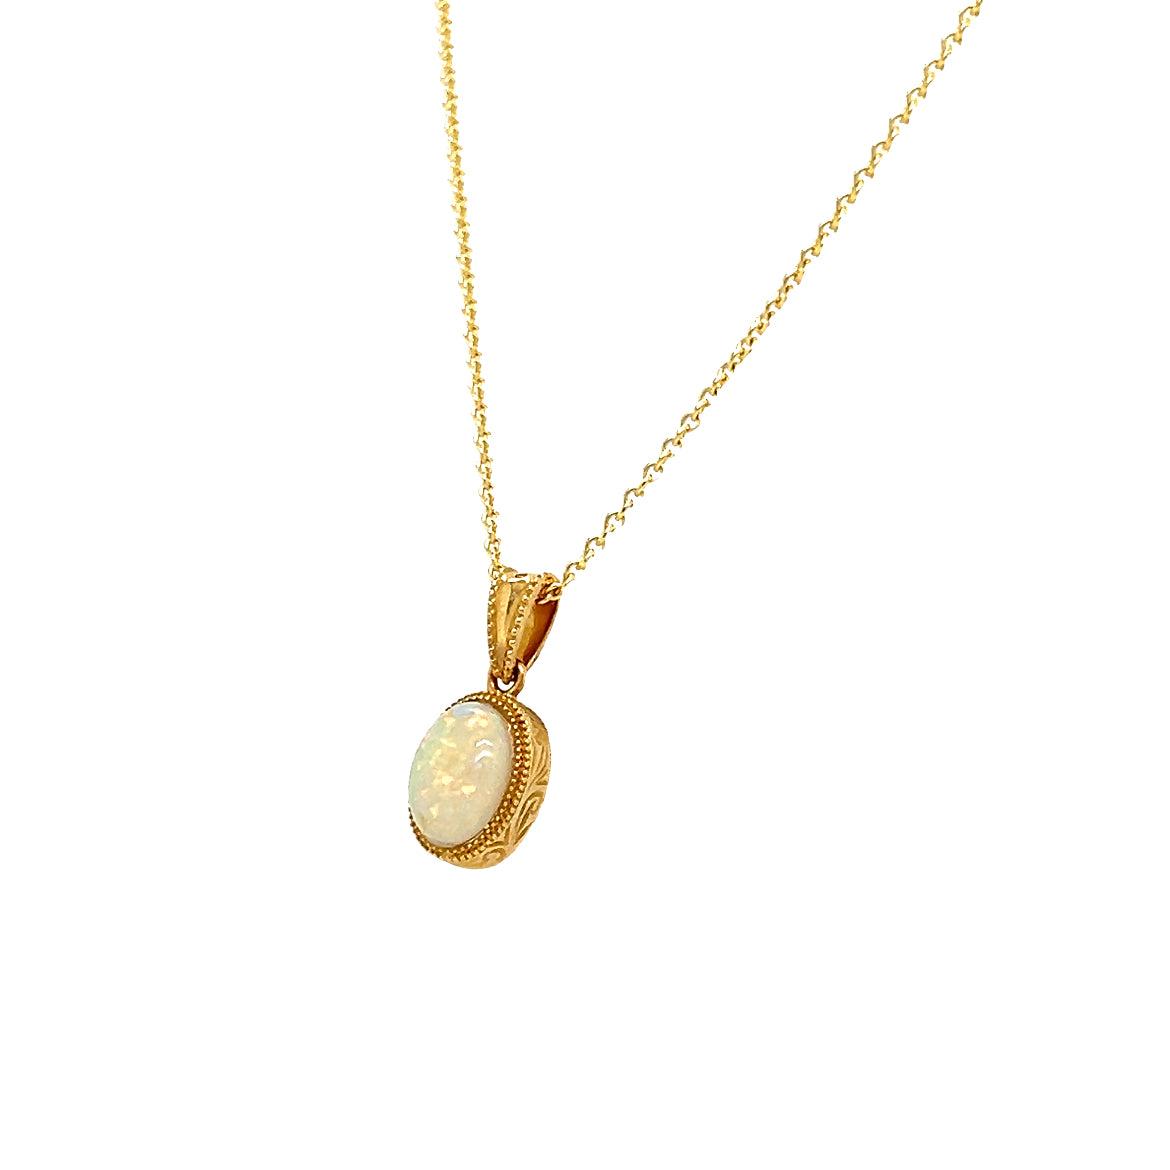 White Opal Pendant with Engraving and Milgrain Details in 14K Yellow Gold Right Side View